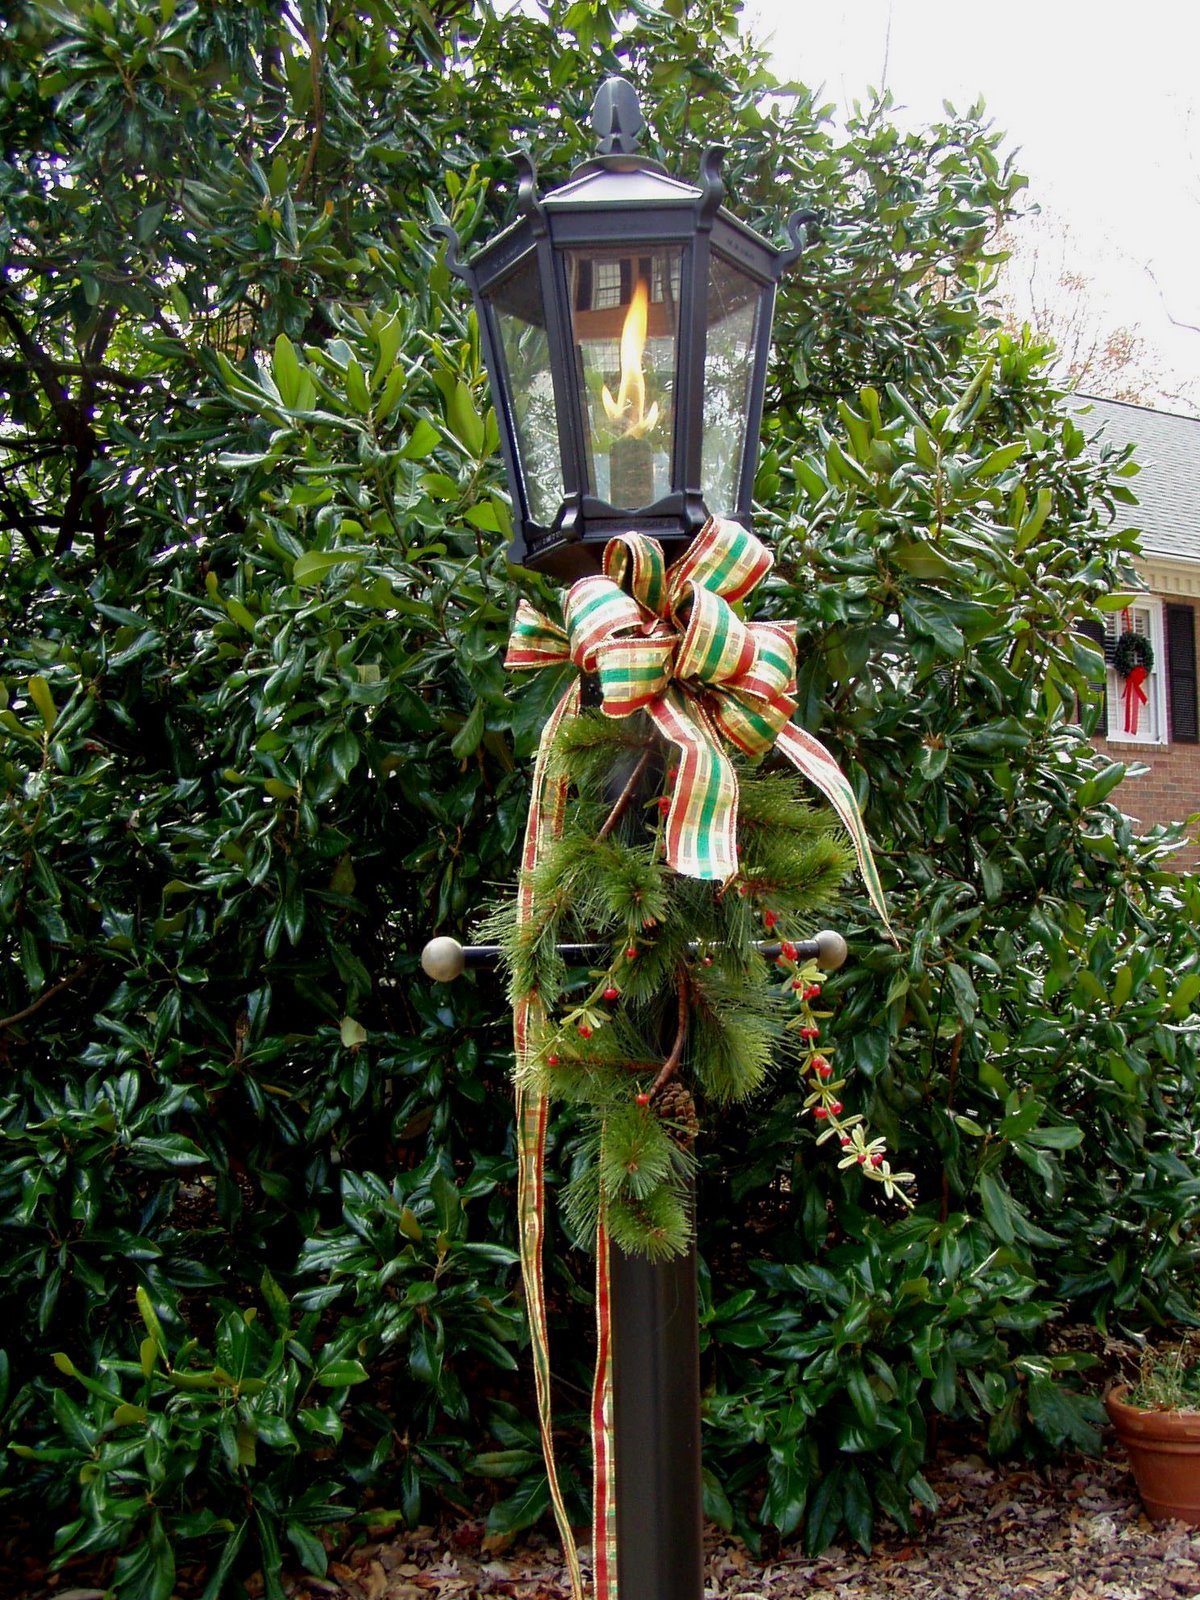 Lighted Outdoor Christmas Lamp Post
 Decorate for a Traditional Christmas